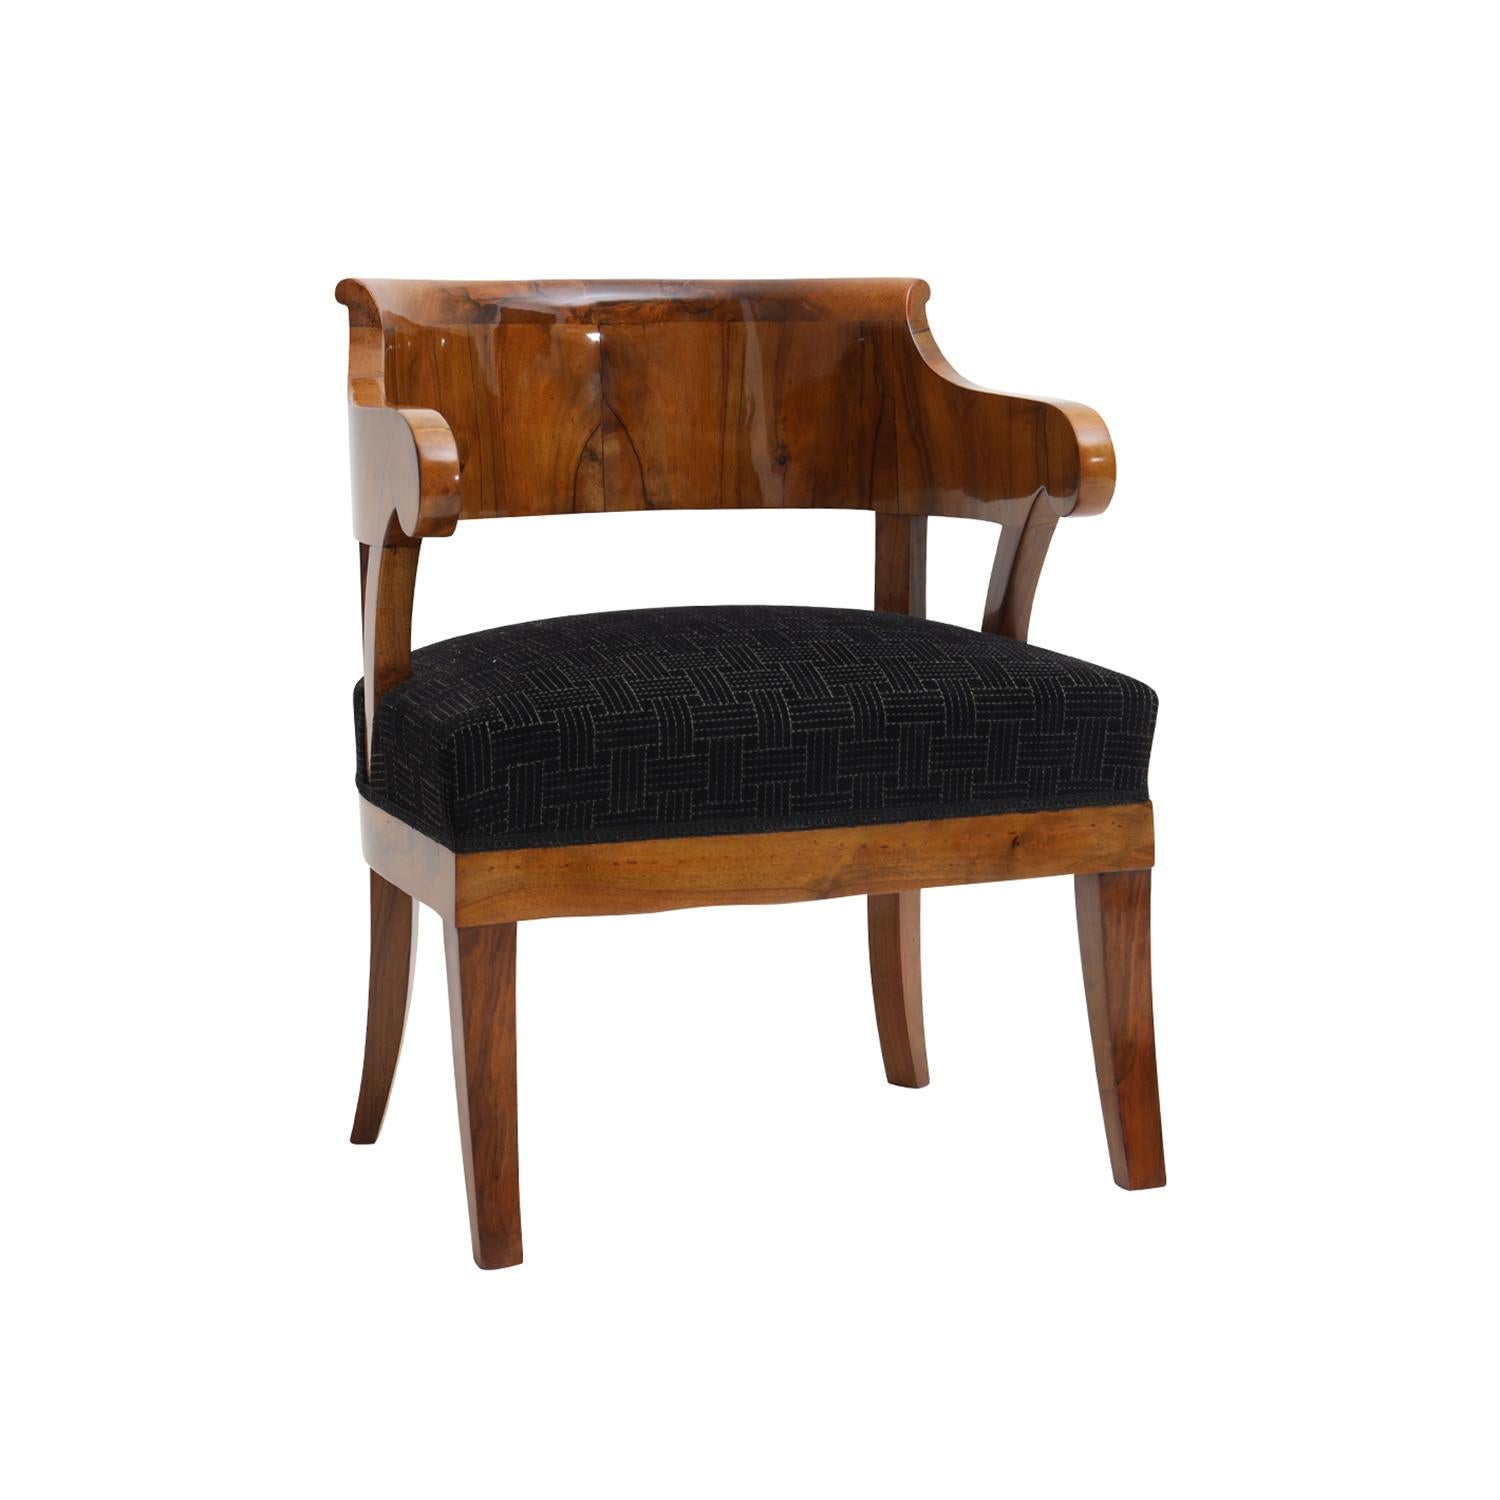 A light-brown, antique German Biedermeier single armchair made of hand crafted shellac polished, partly veneered Mahogany in very good condition. The side, end chair has an arched, curved backrest standing on four wooden legs. Newly upholstered in a